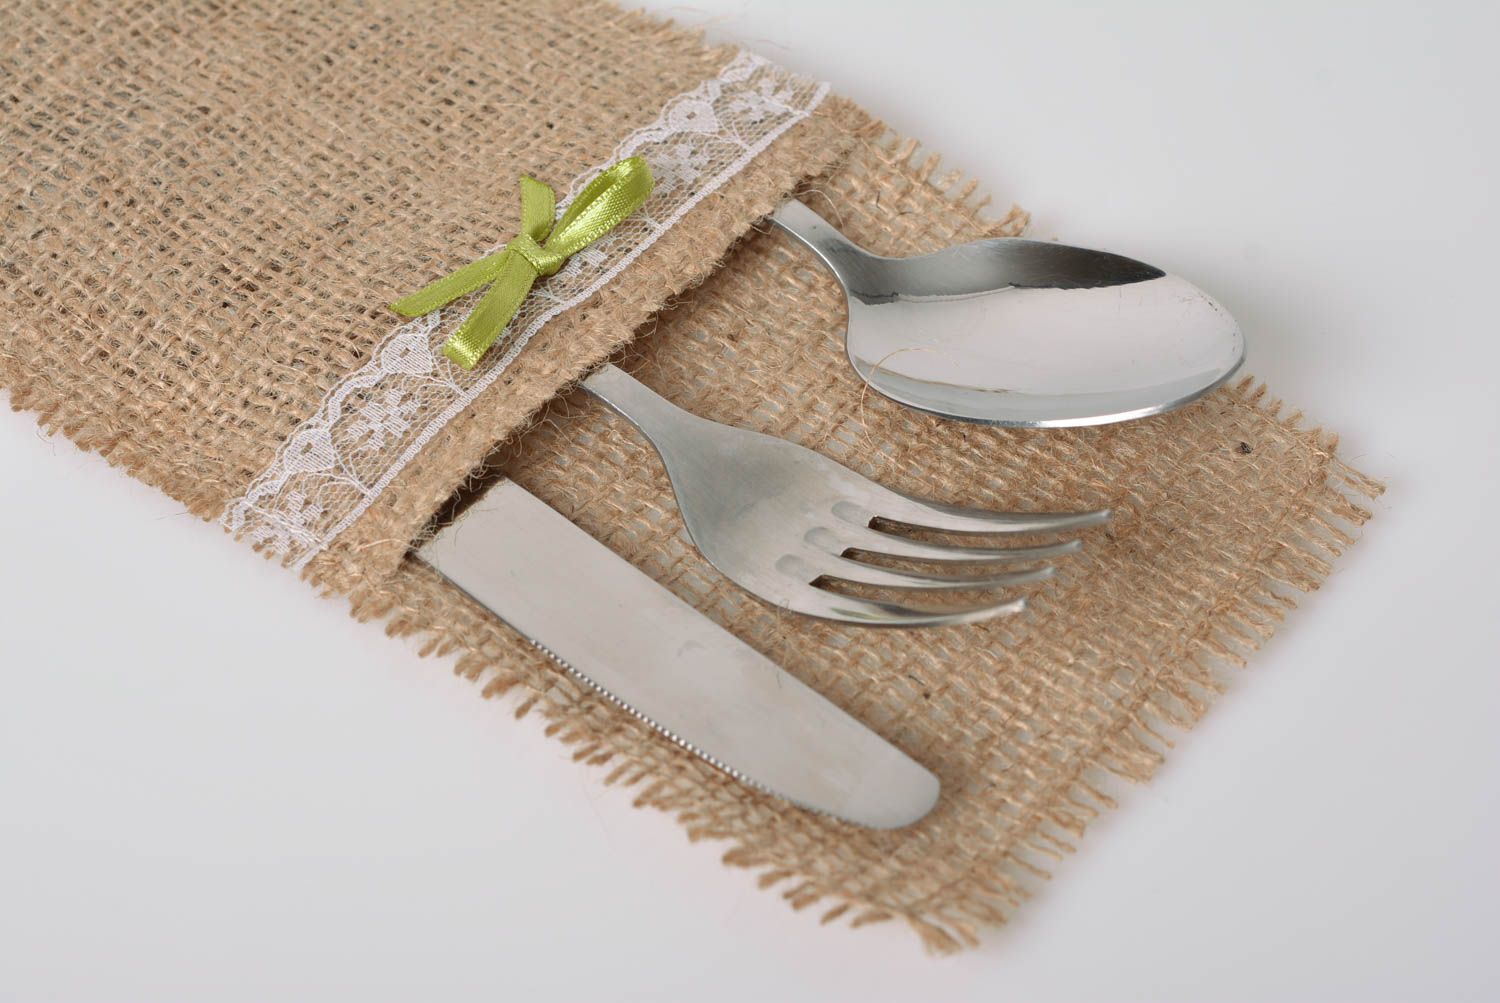 Case for cutlery made of burlap for casual or festive table handmade home decor photo 2